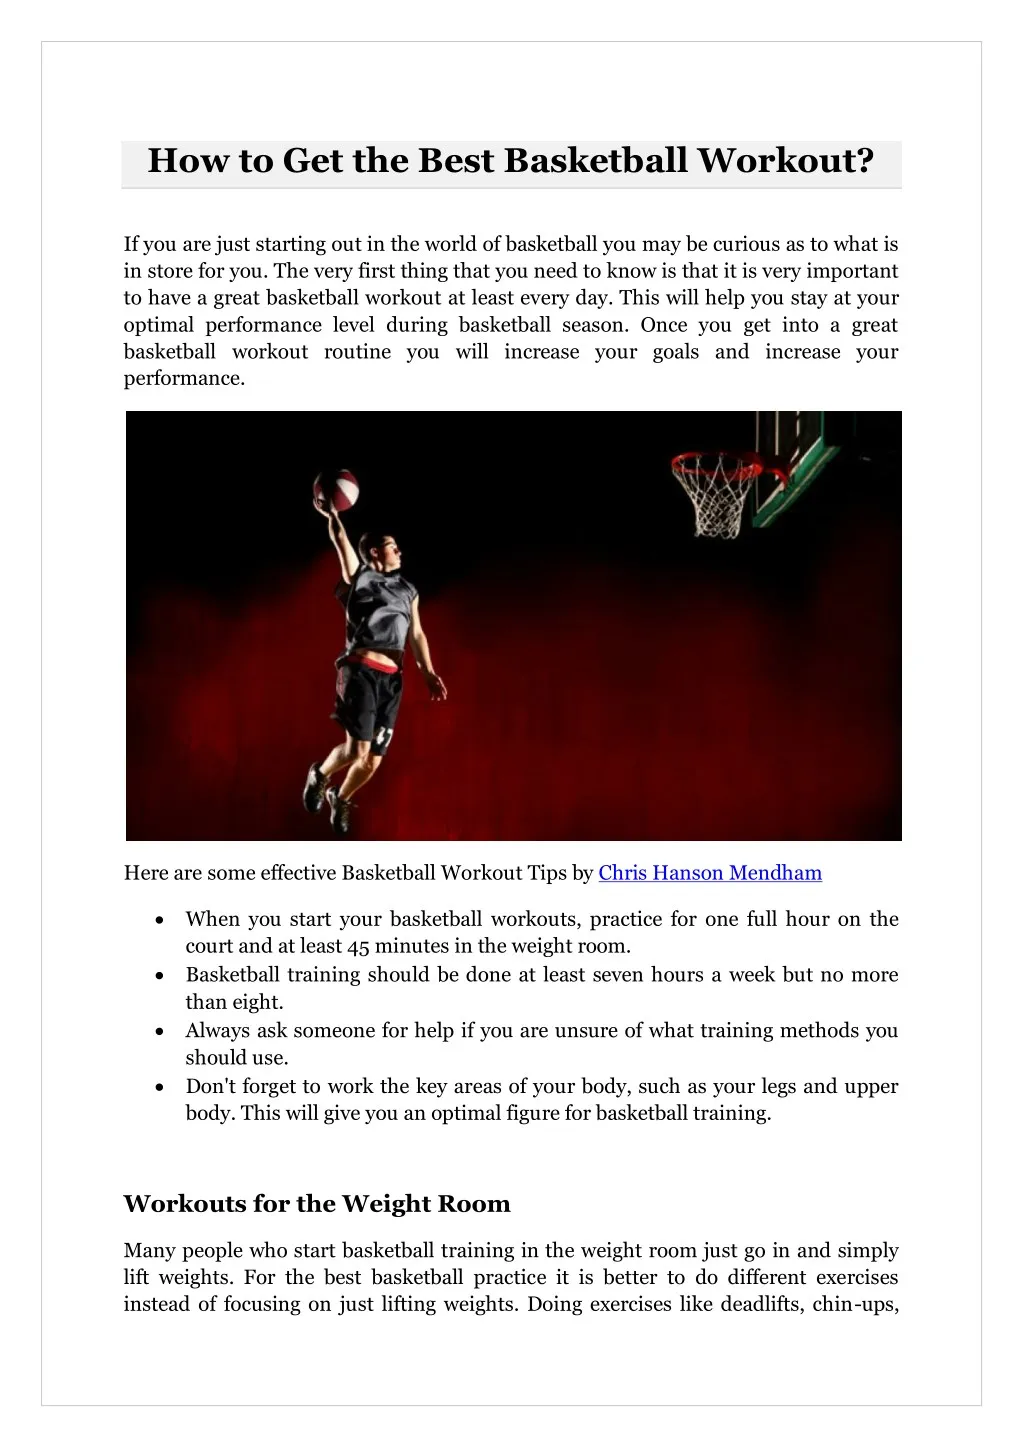 how to get the best basketball workout